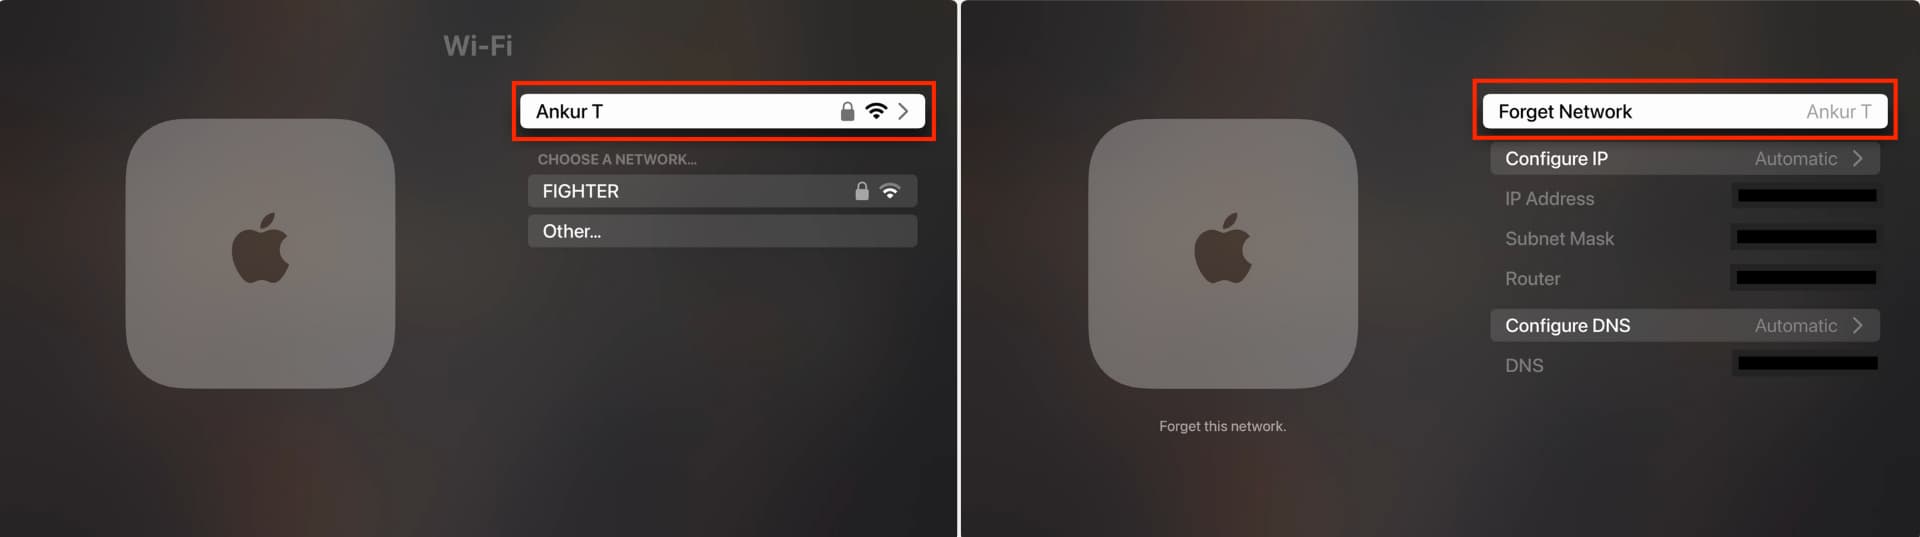 Forget existing Wi-Fi network on Apple TV